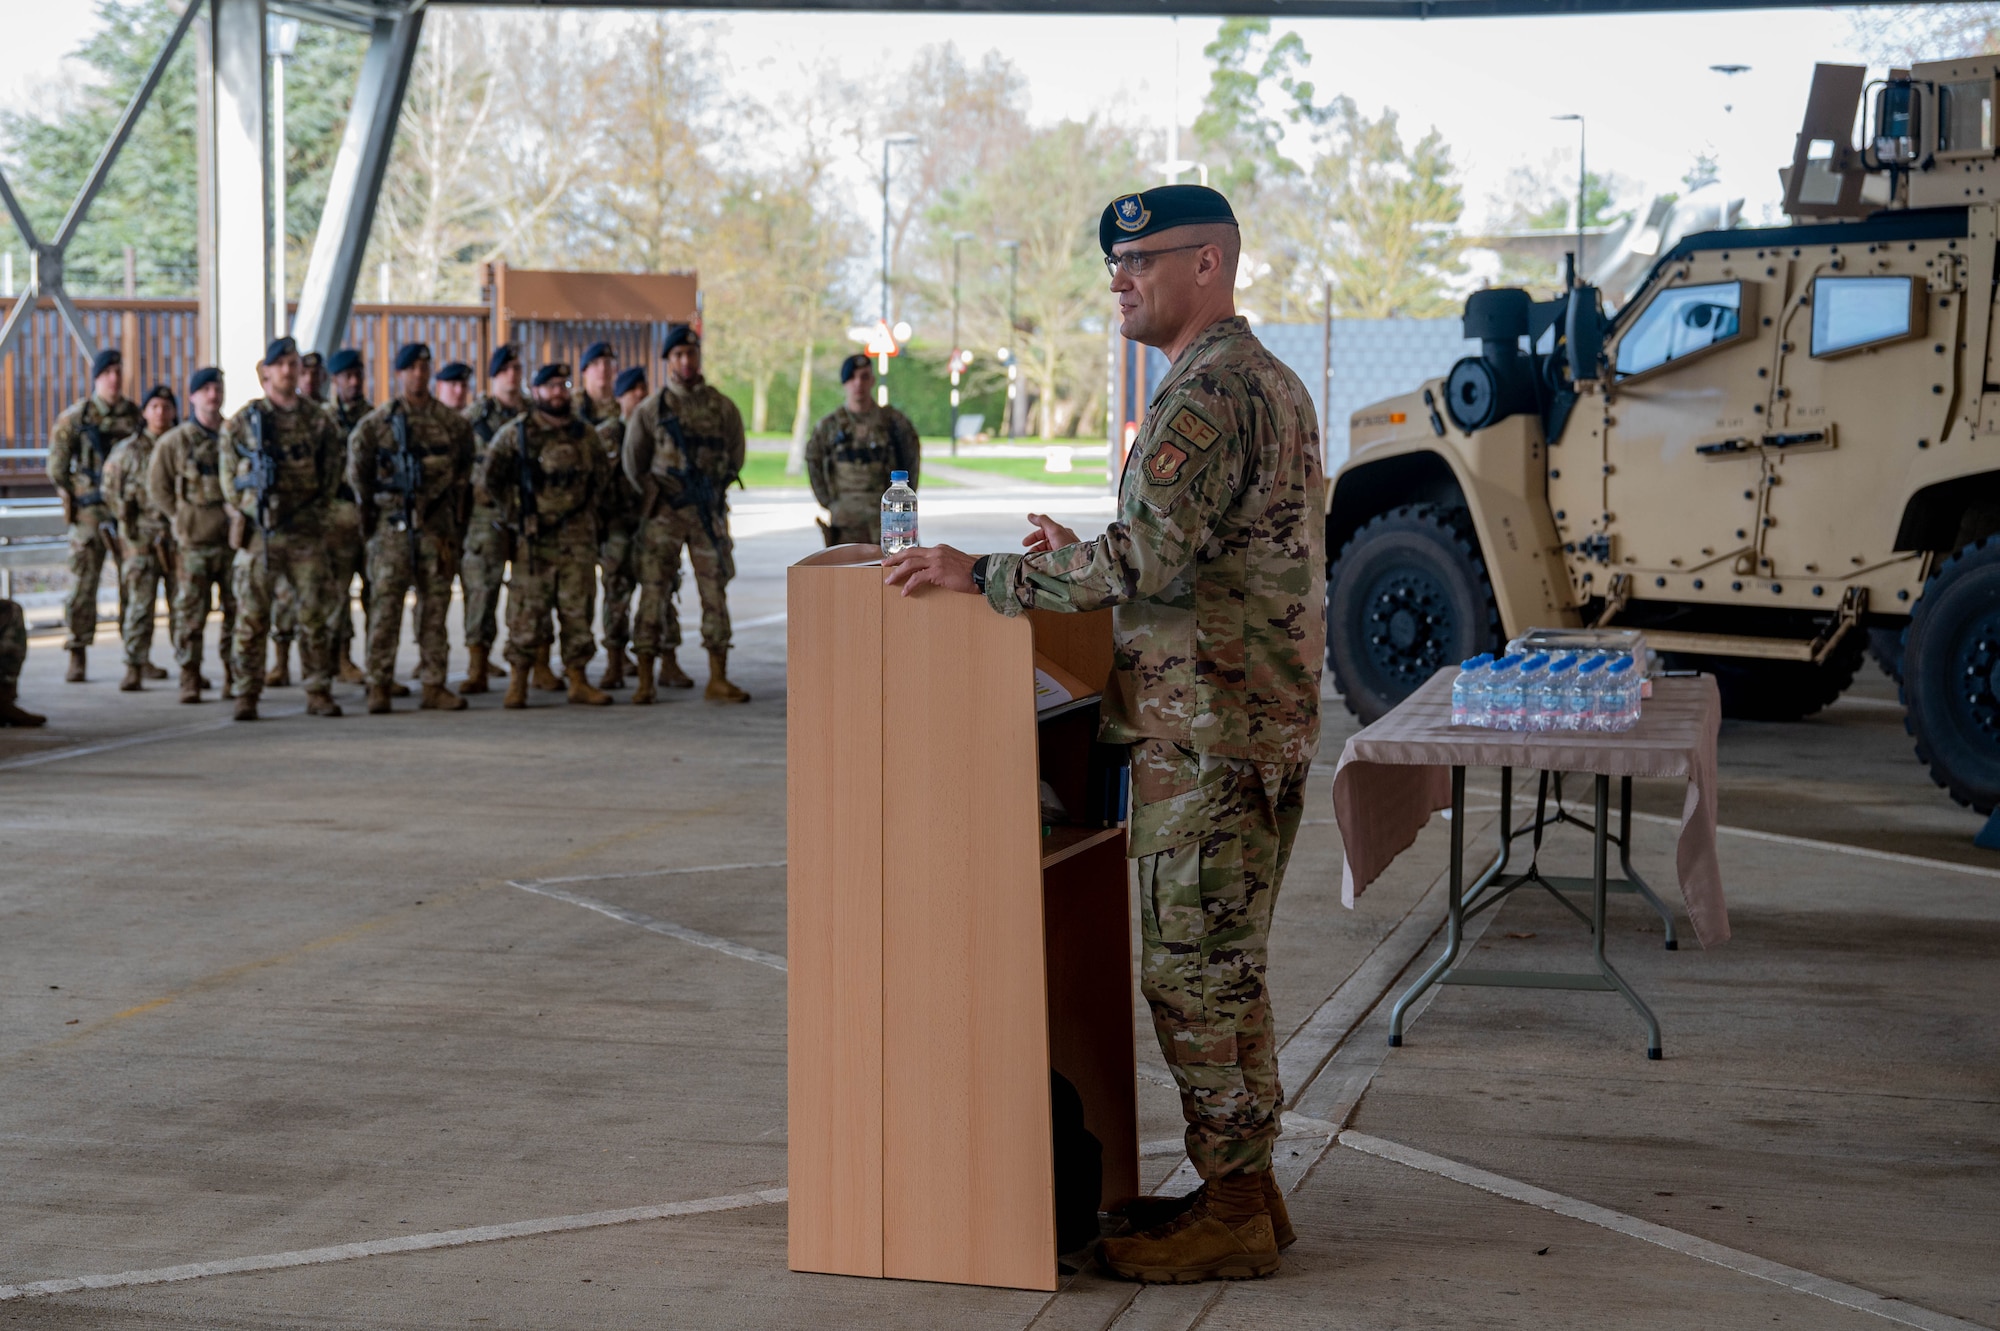 A U.S. military member speaks at a podium to a crowd of people during an event